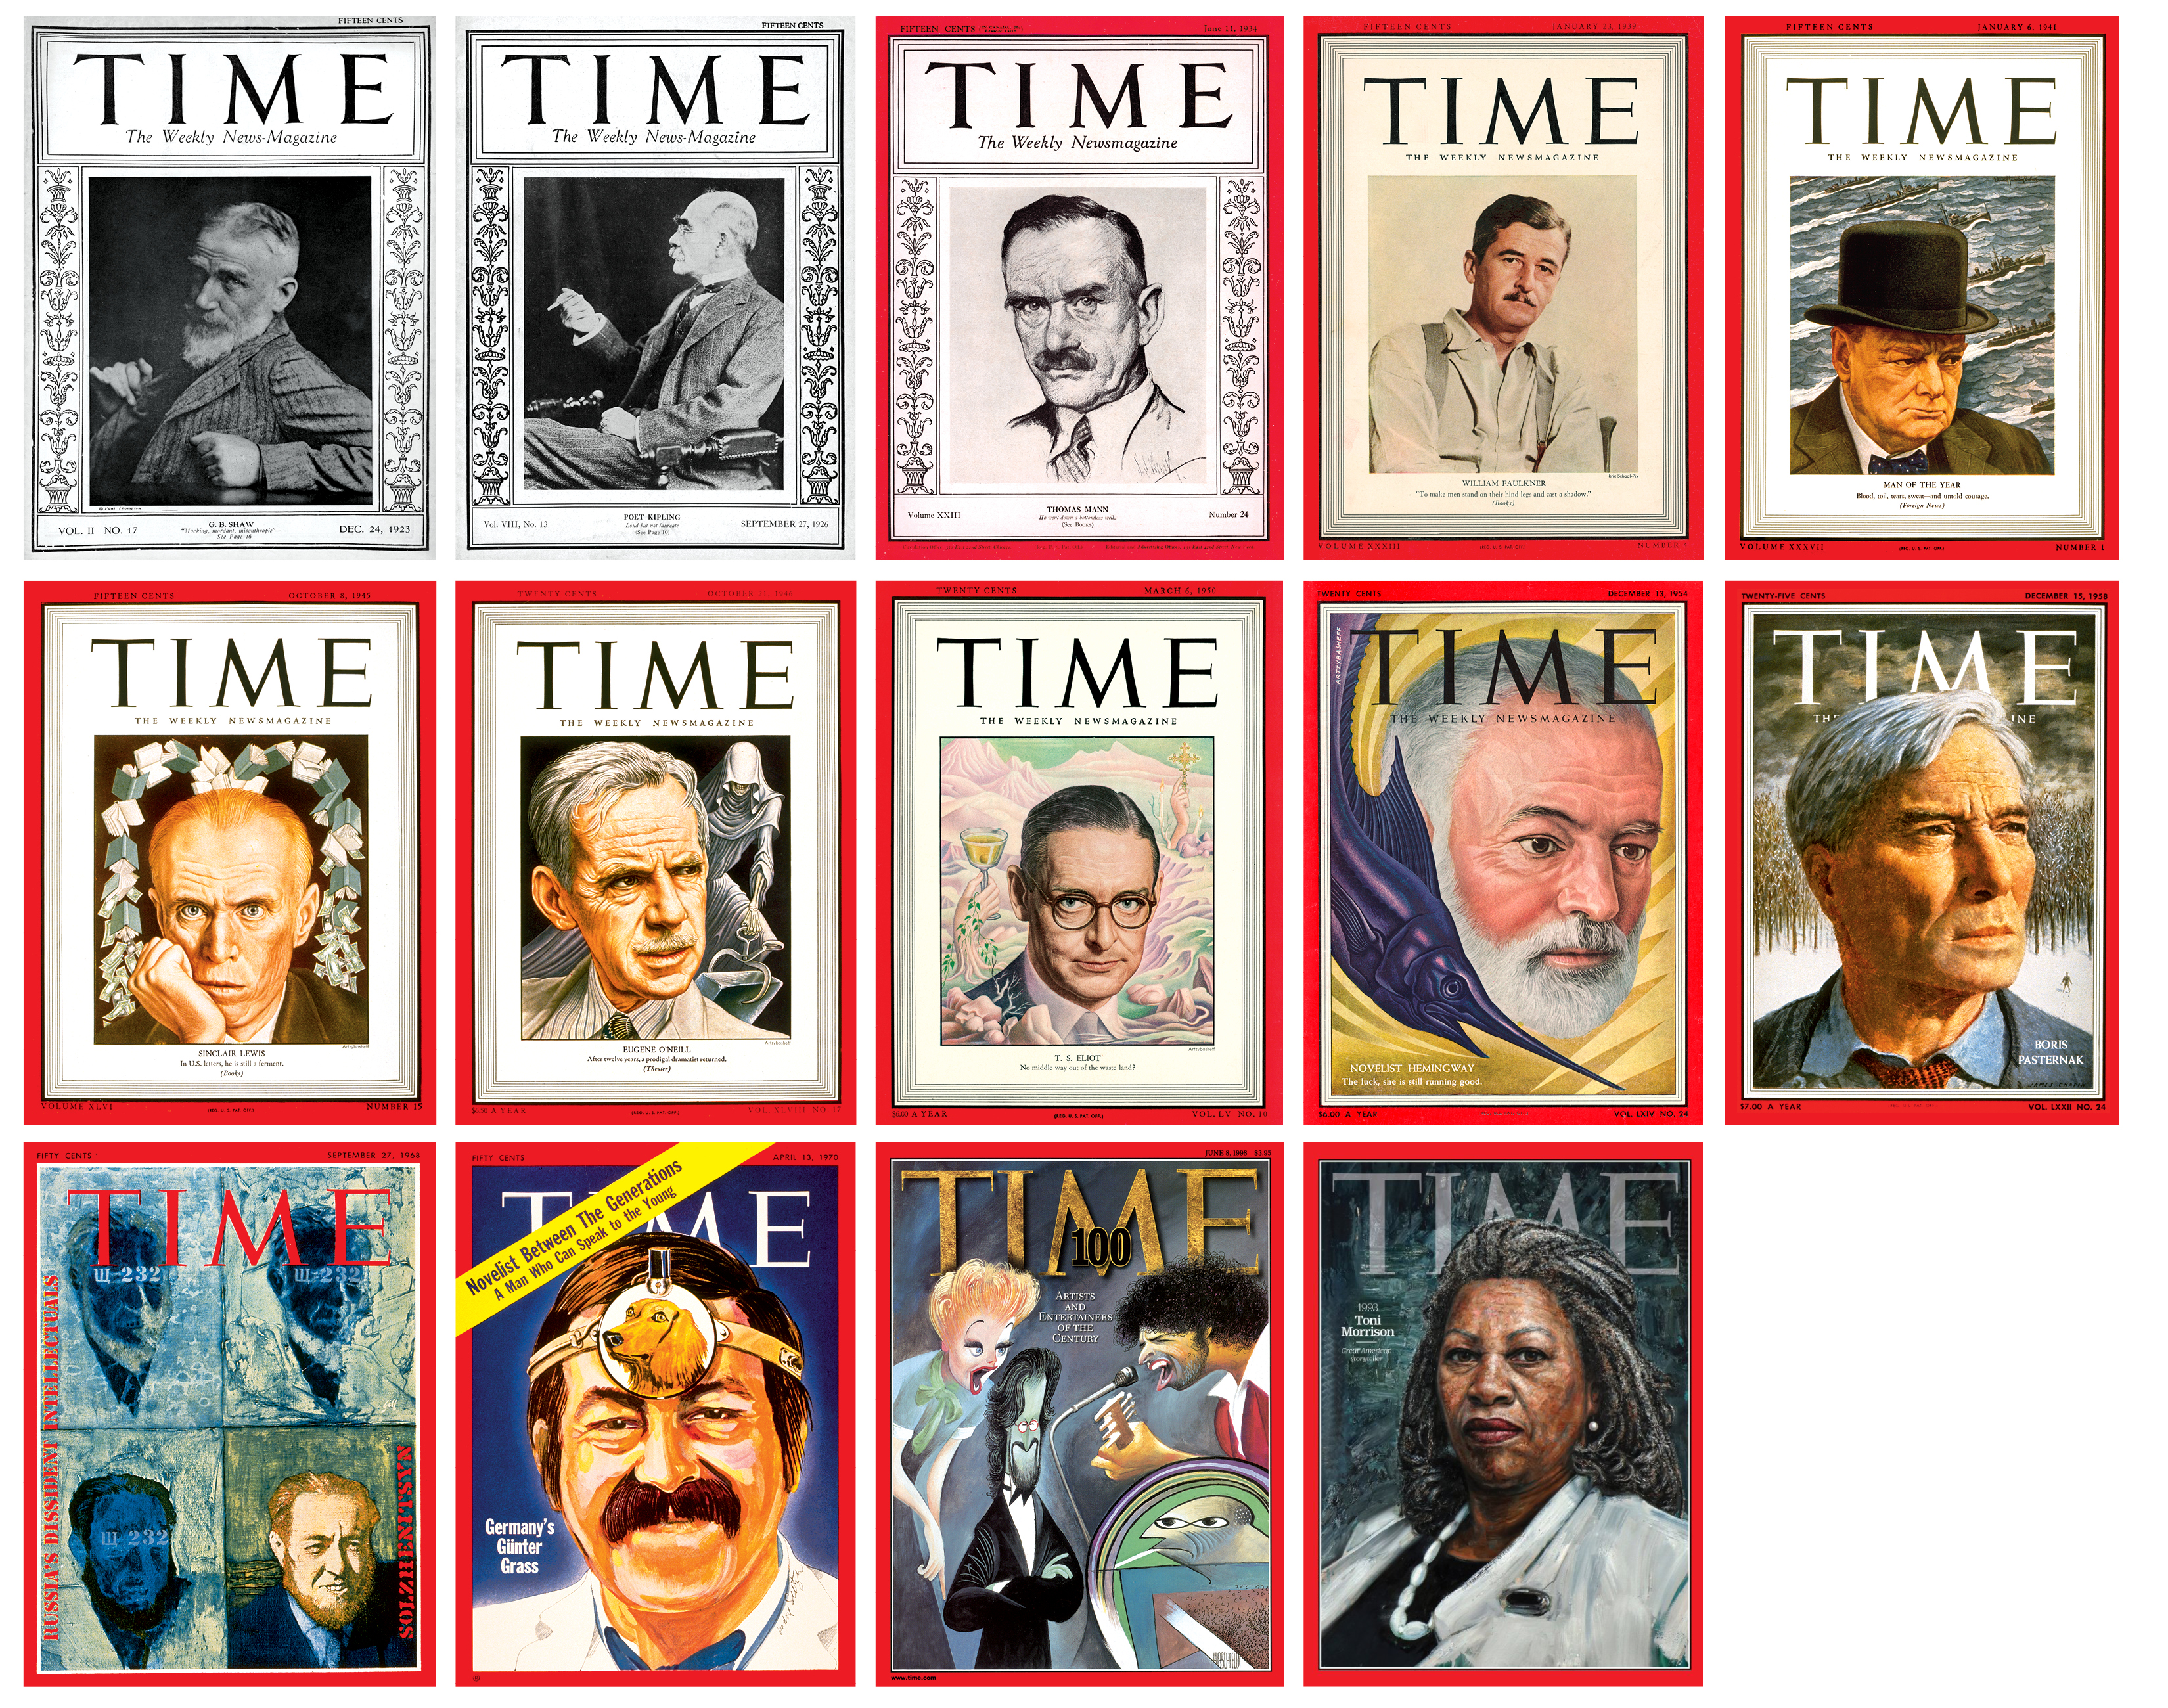 Nobel Prize in Literature winners who have appeared on the cover of TIME.